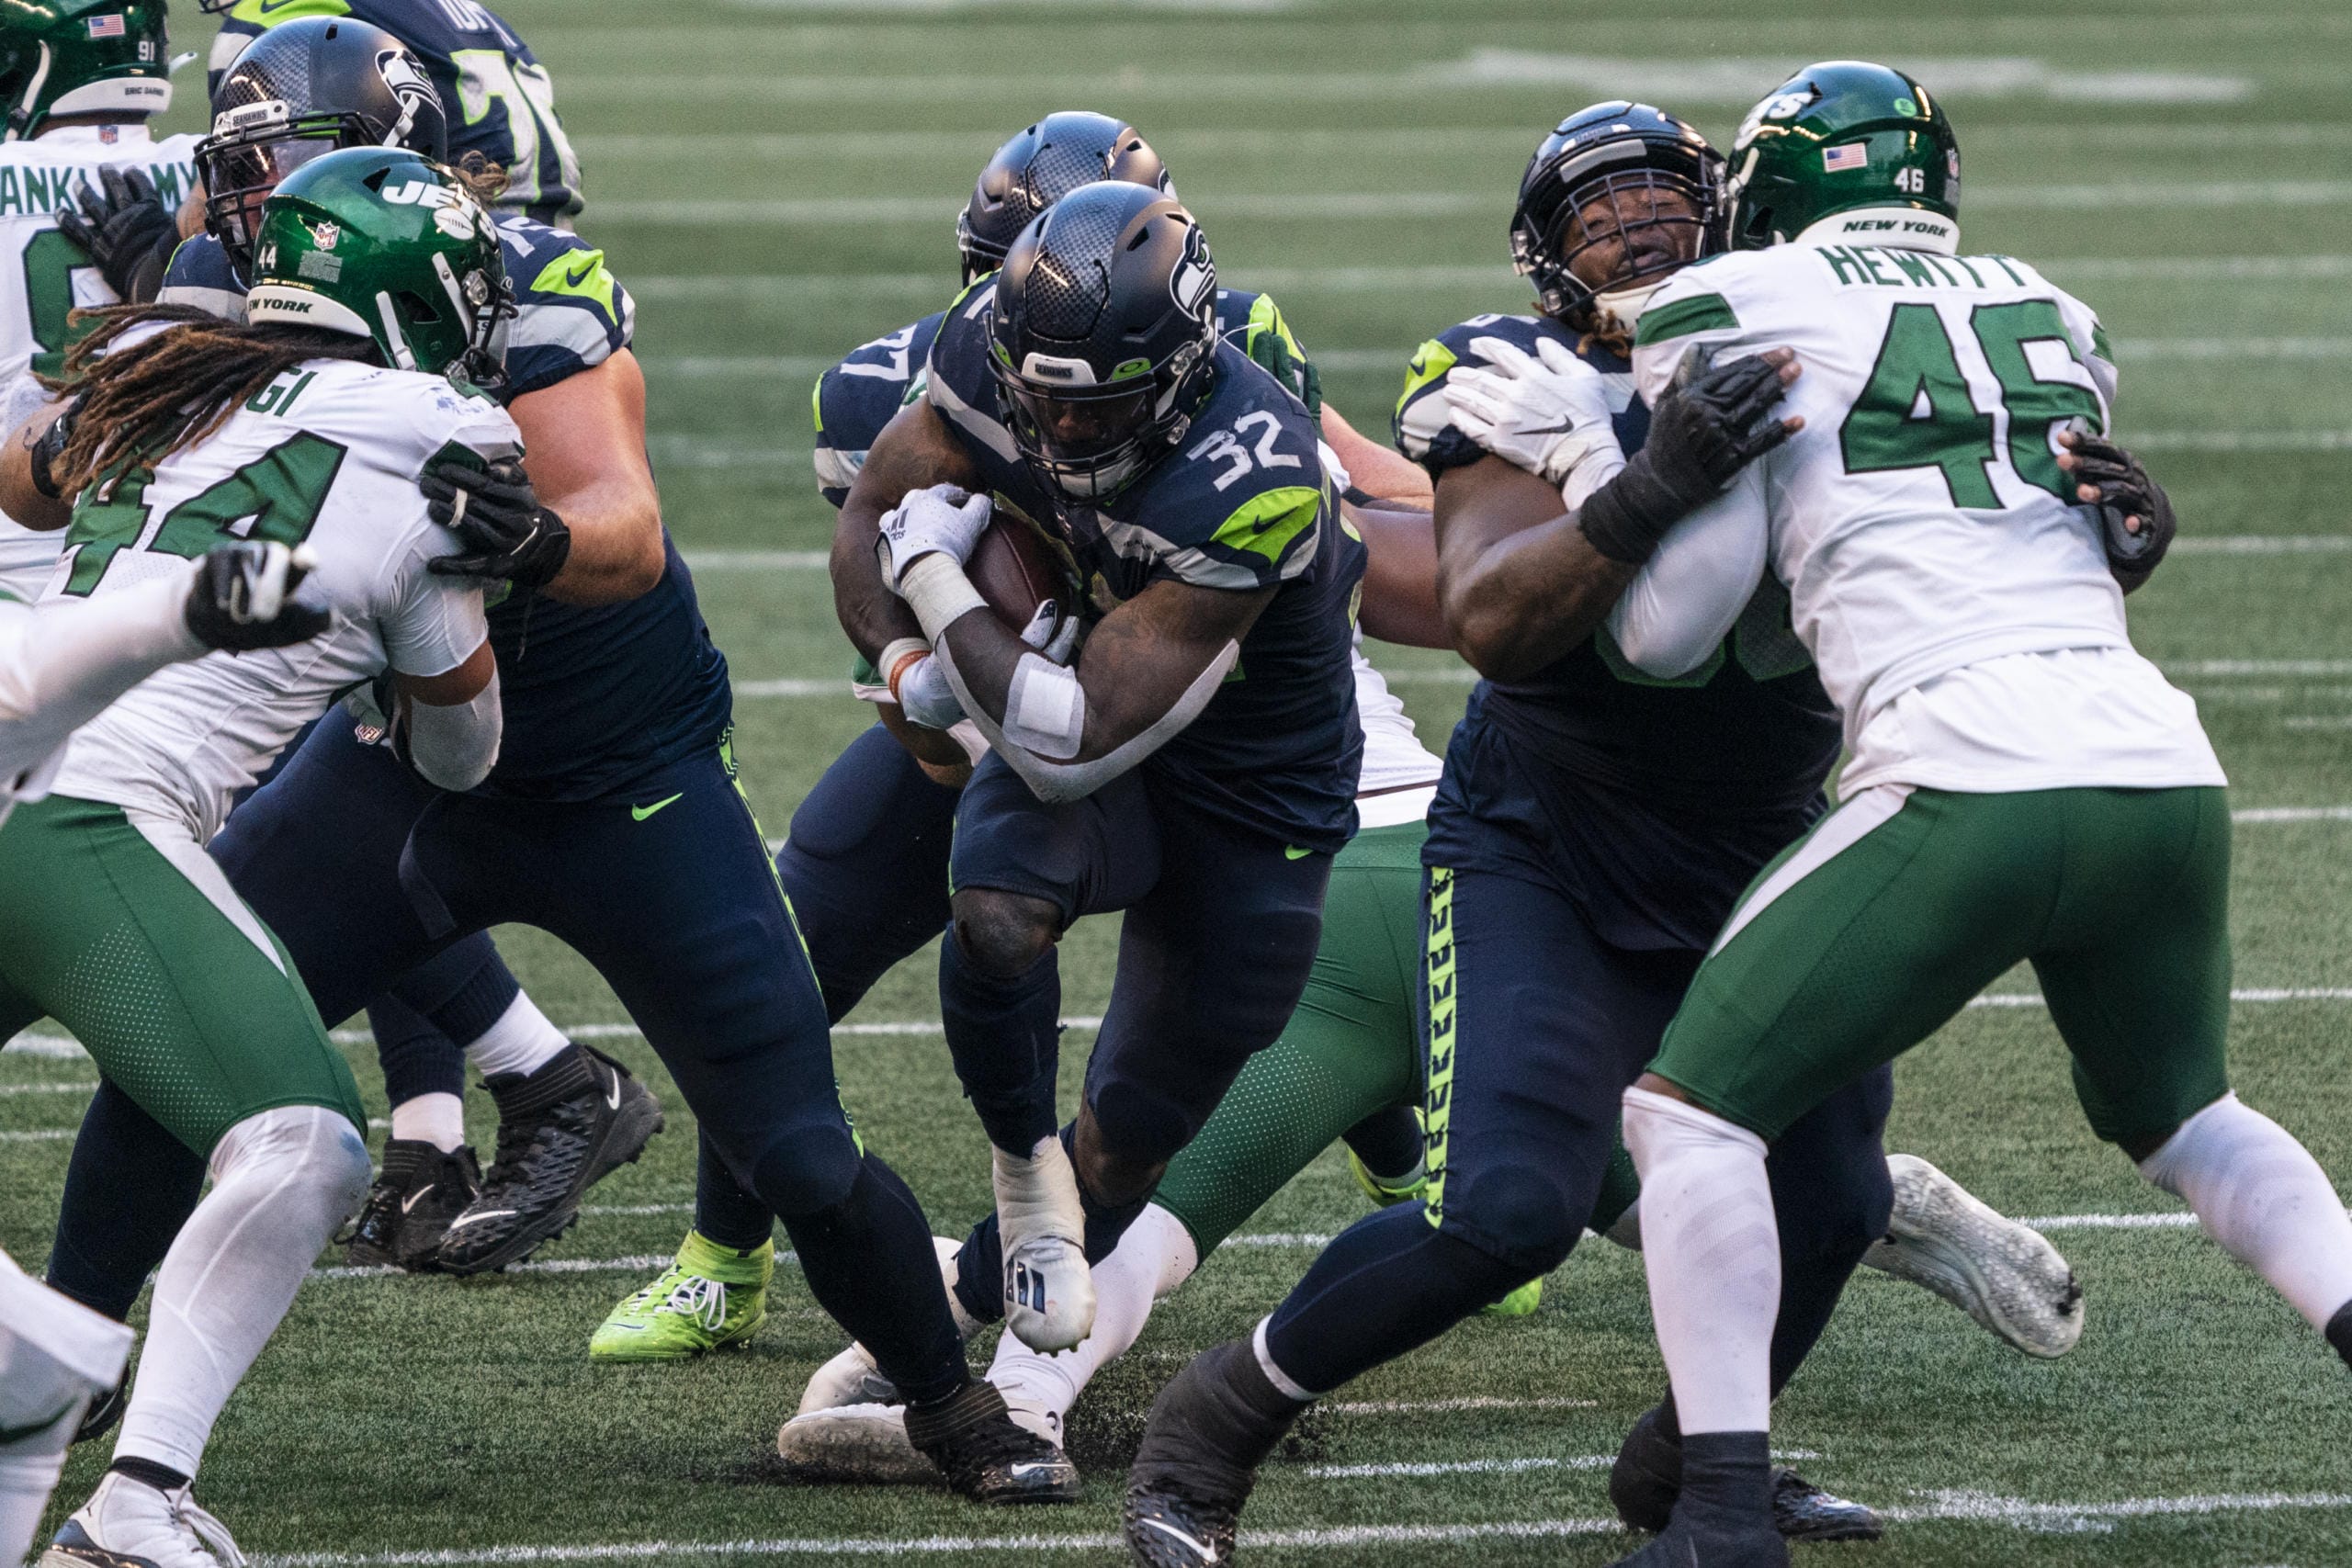 Seattle Seahawks running back Chris Carson runs the ball during the second half of an NFL football game against the New York Jets, Sunday, Dec. 13, 2020, in Seattle. The Seahawks won 40-3.